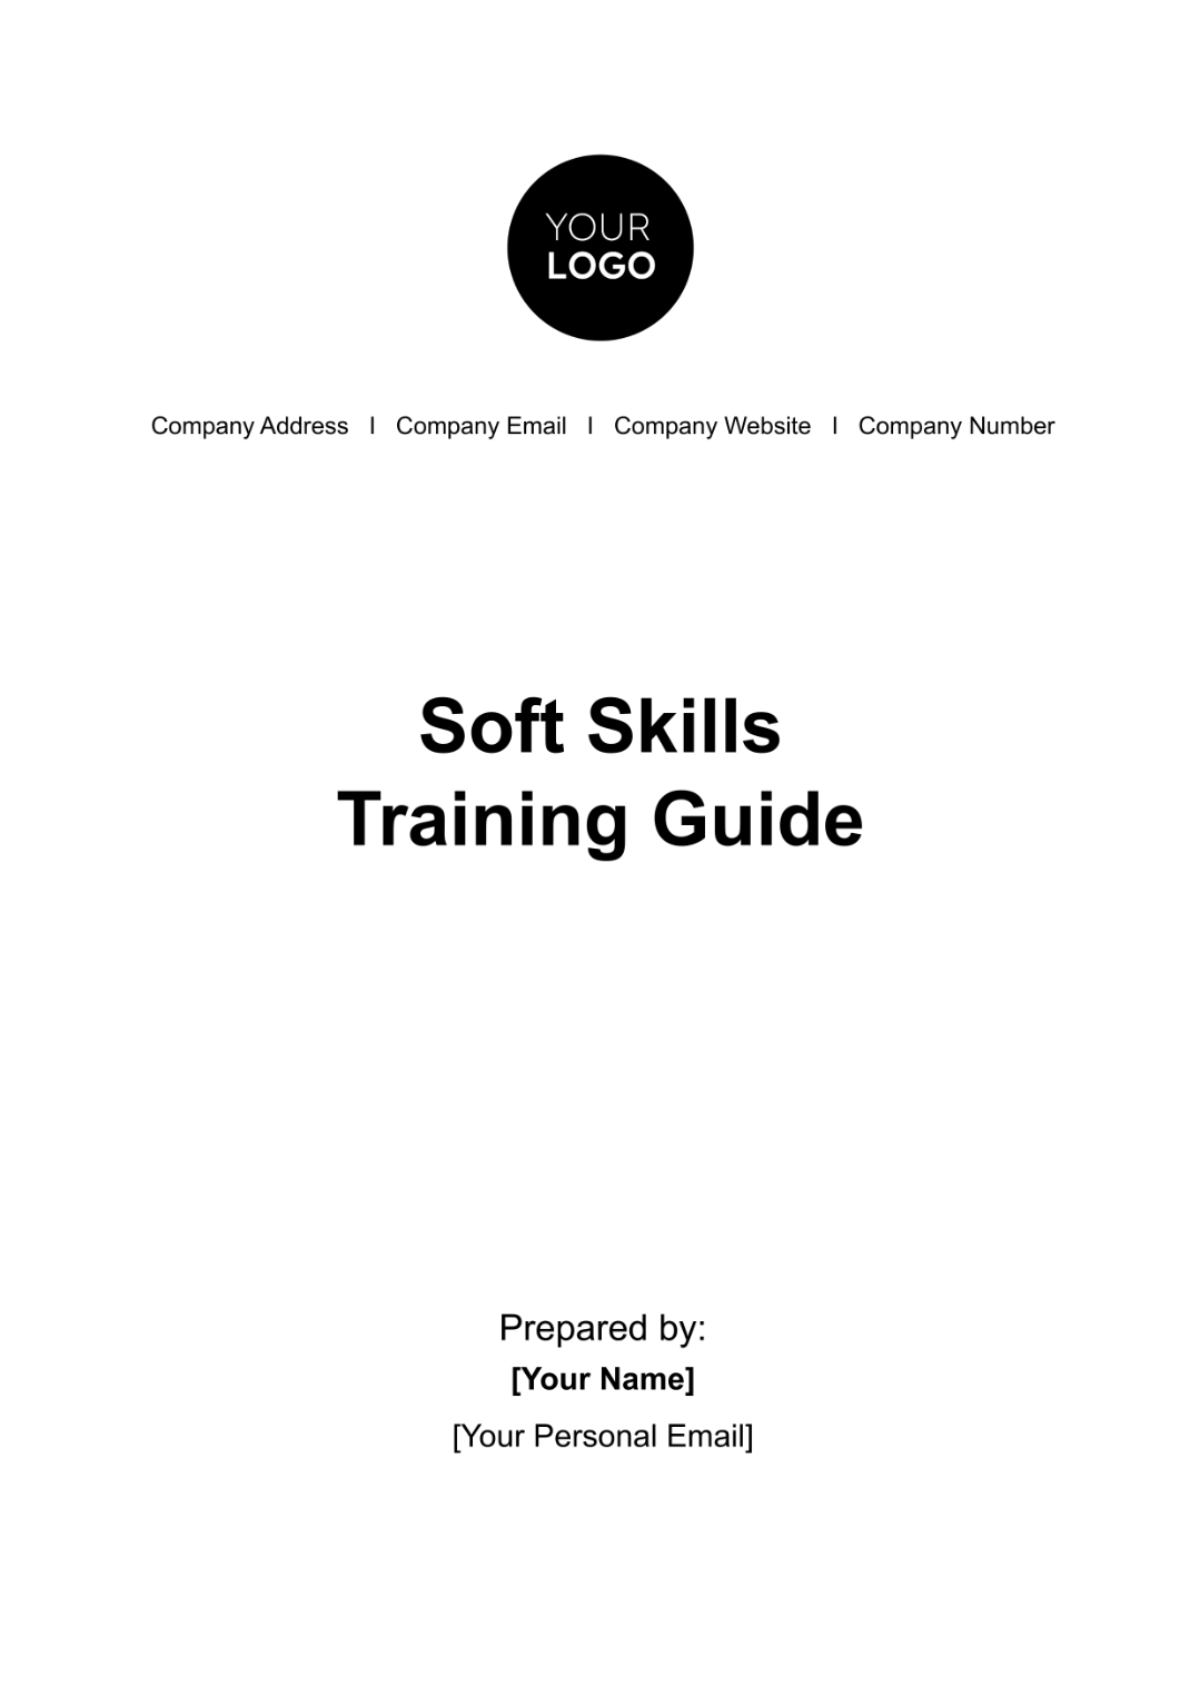 Free Soft Skills Training Guide HR Template